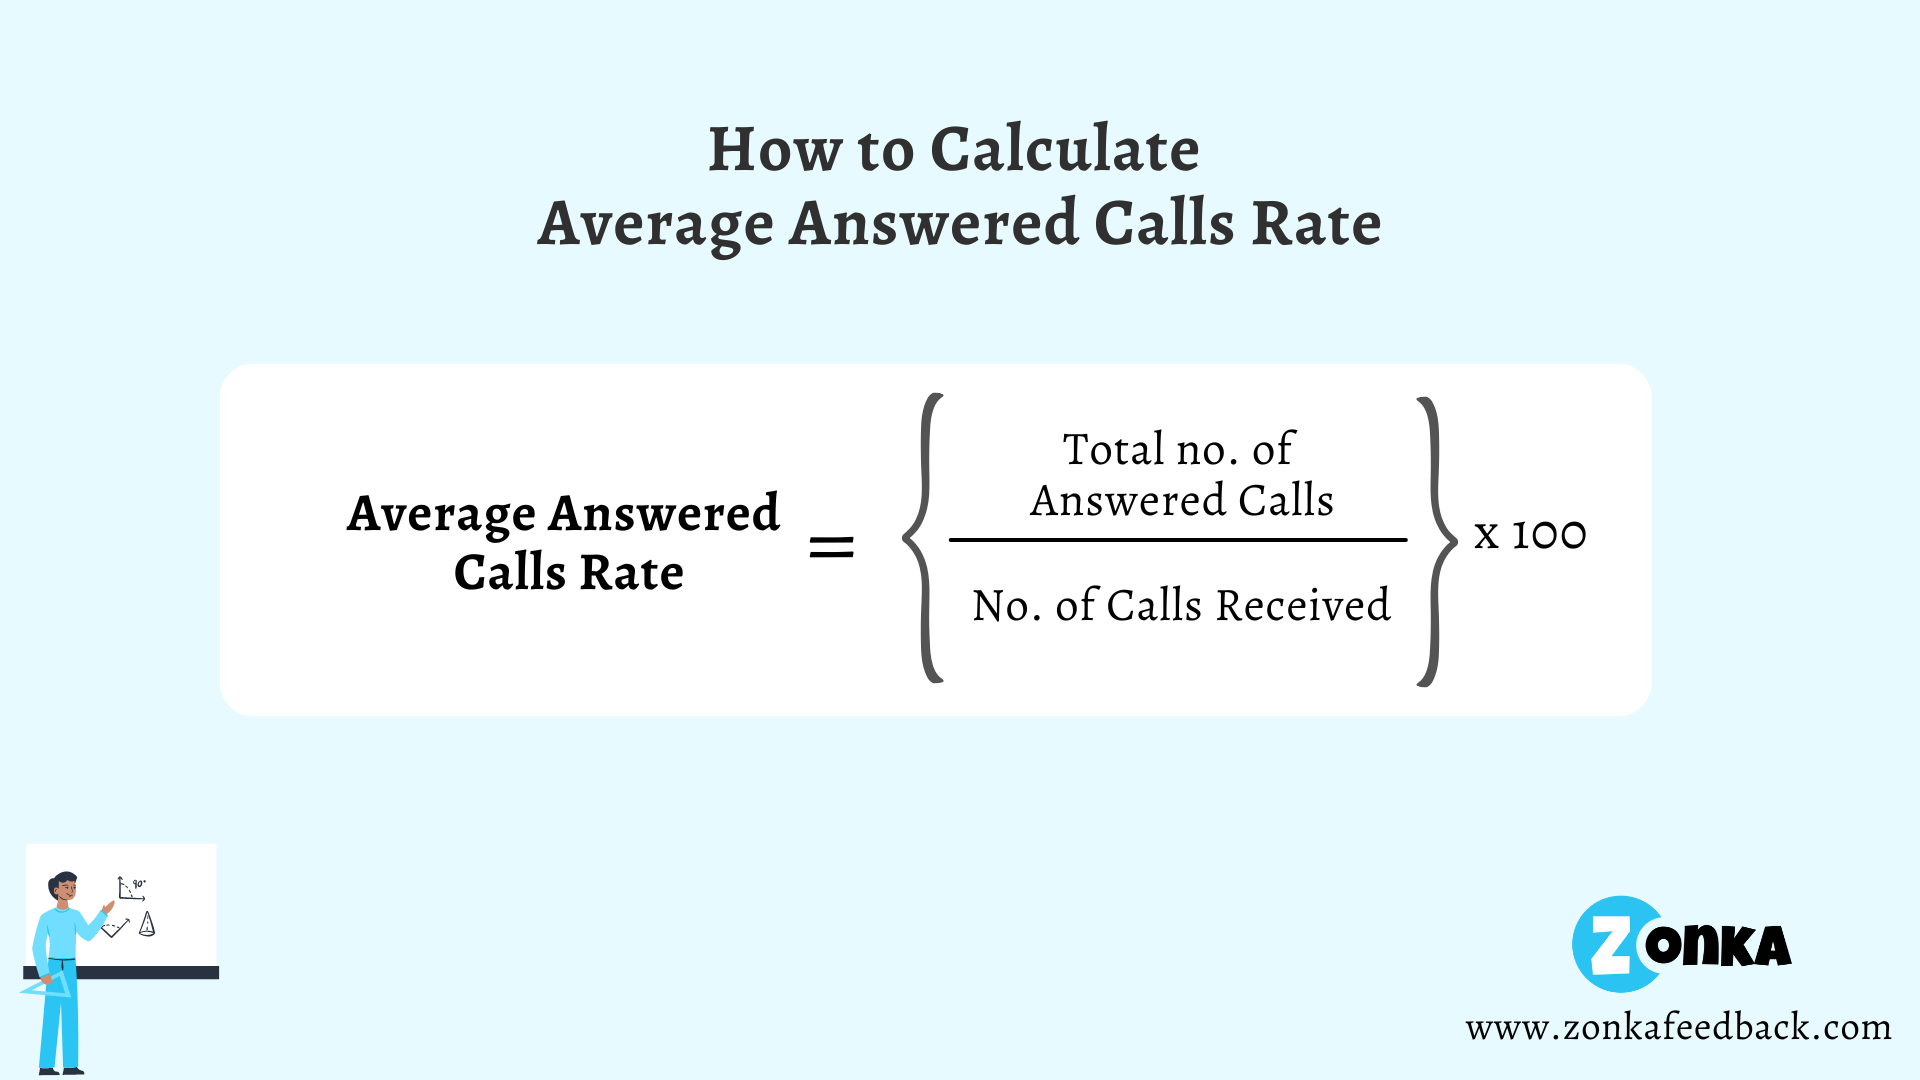 Formula to Calculate Average Answered Calls Rate